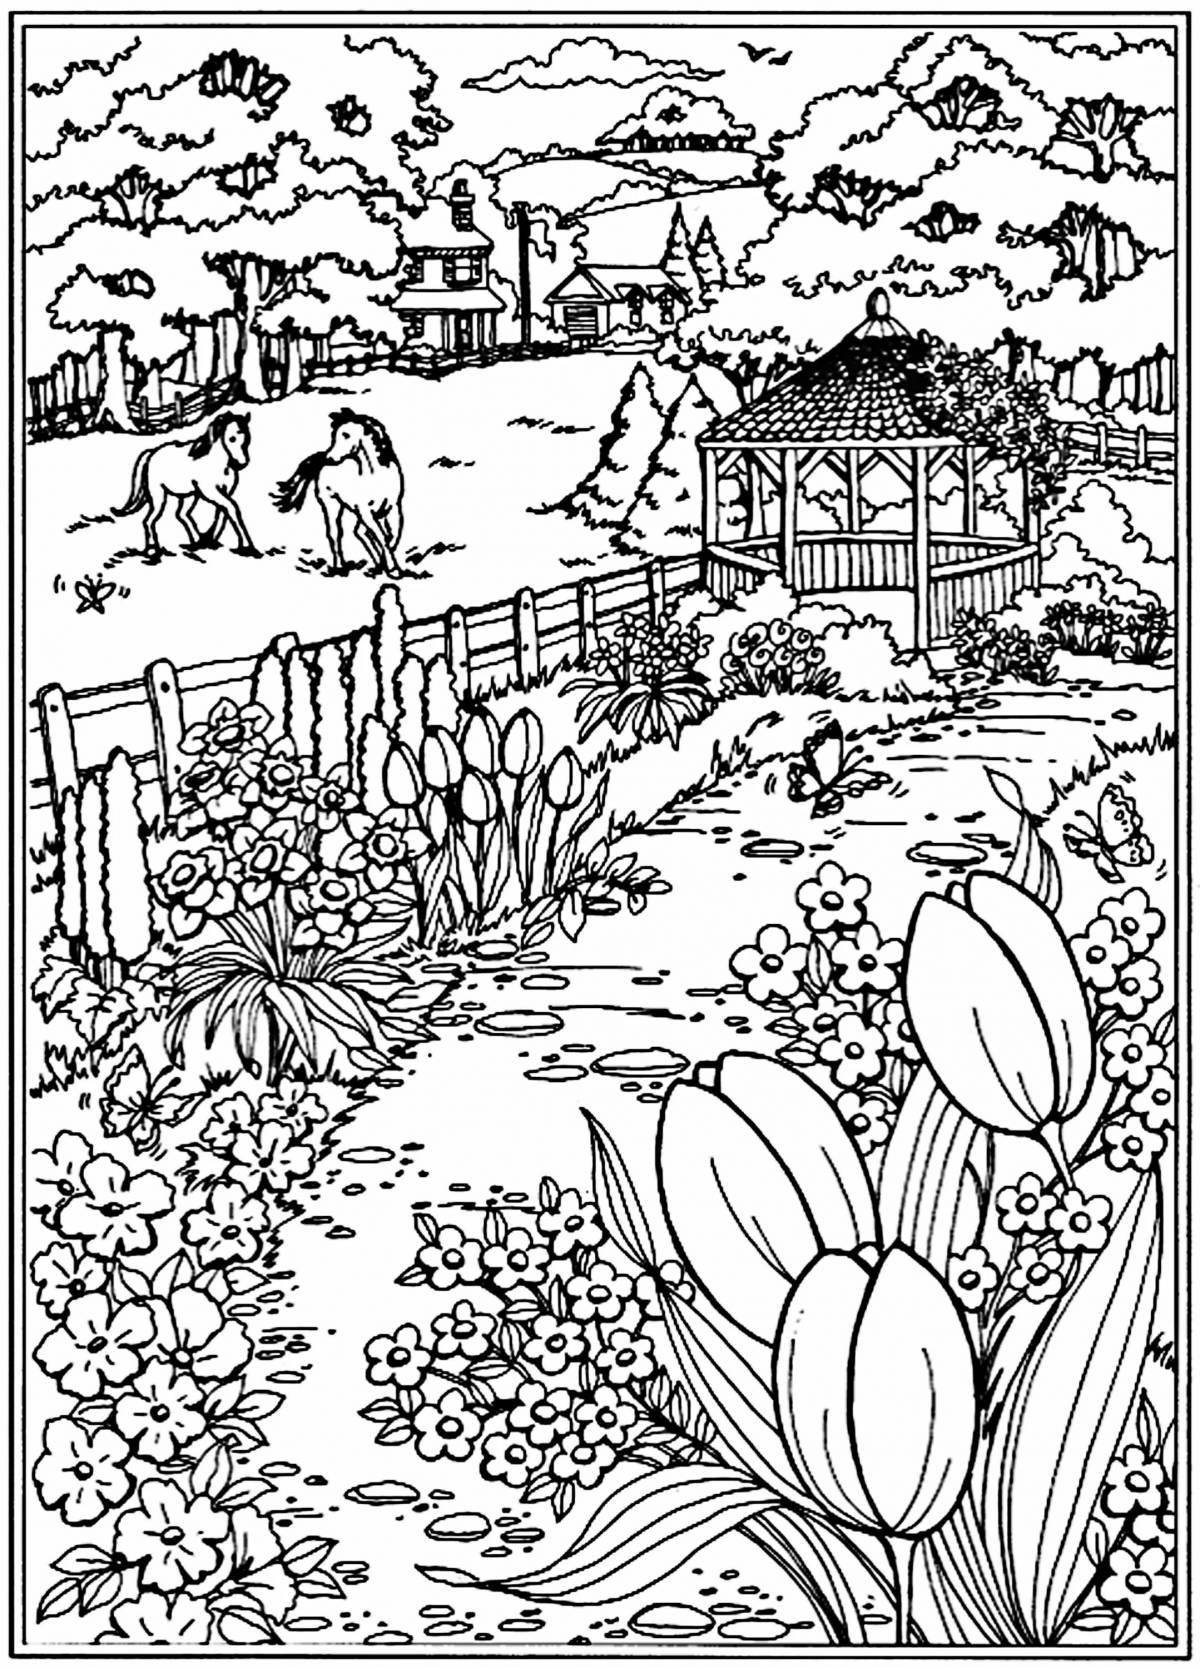 Calming landscape coloring book for adults